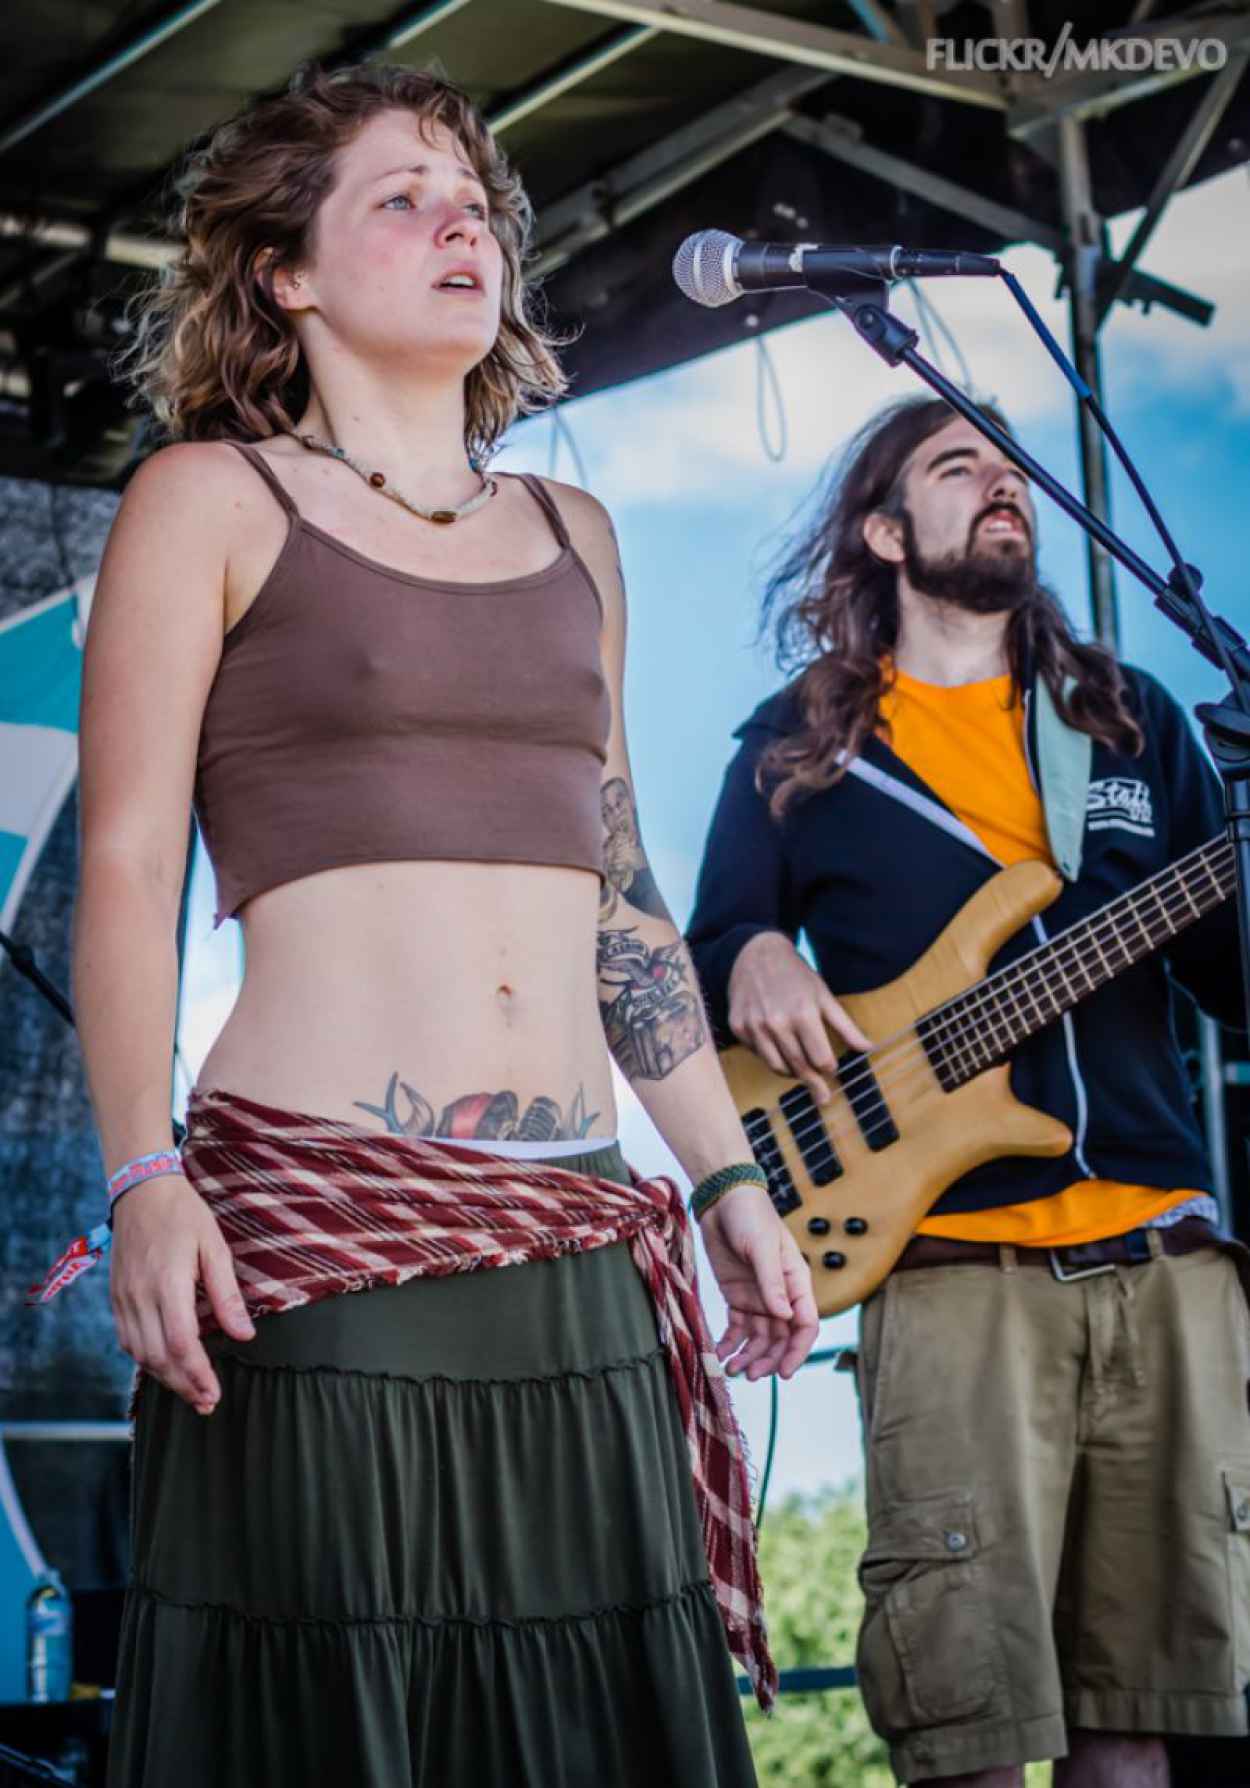 Hayley Jane Performs At Disc Jam Music Festival 2015 